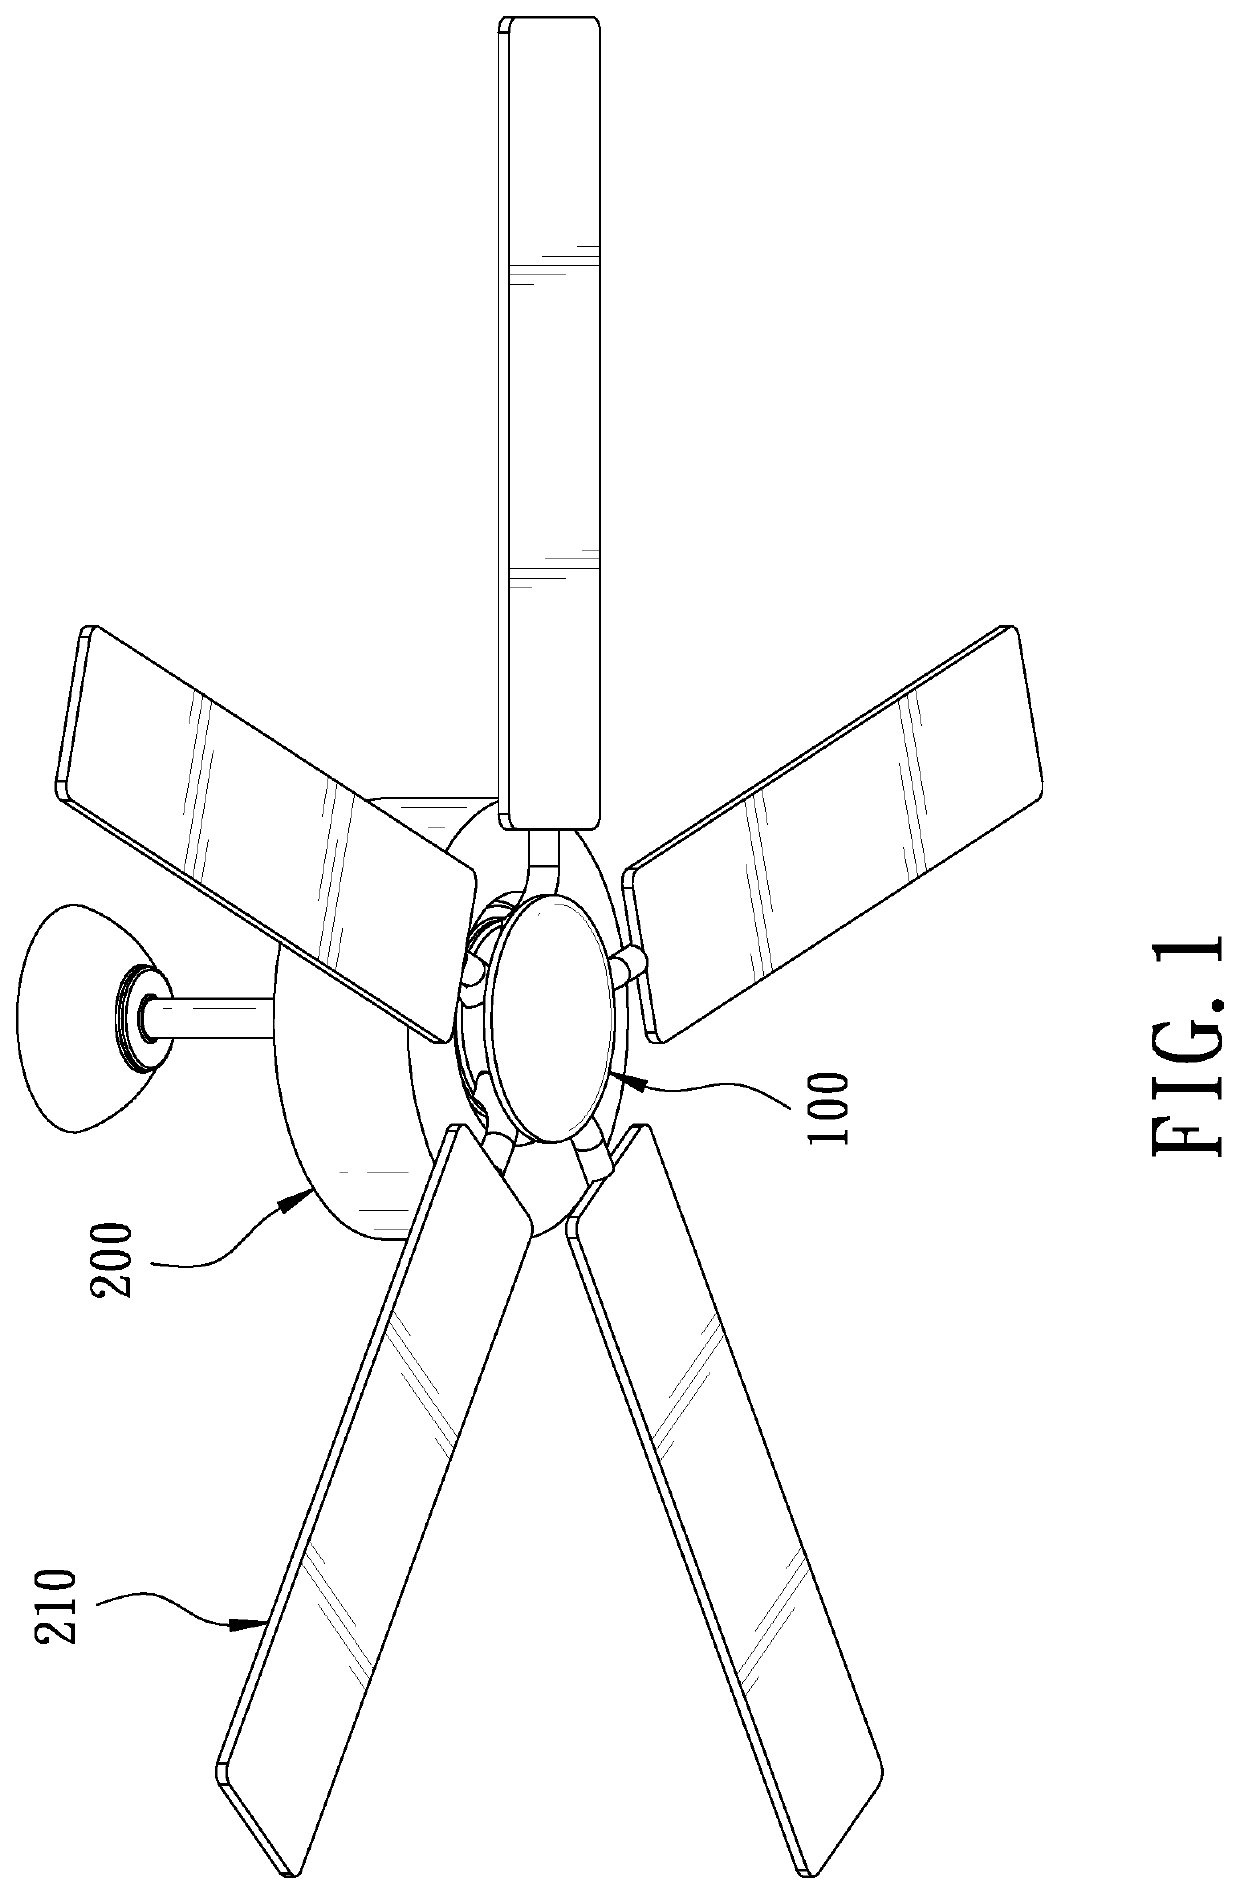 Lamp assembly for ceiling fan